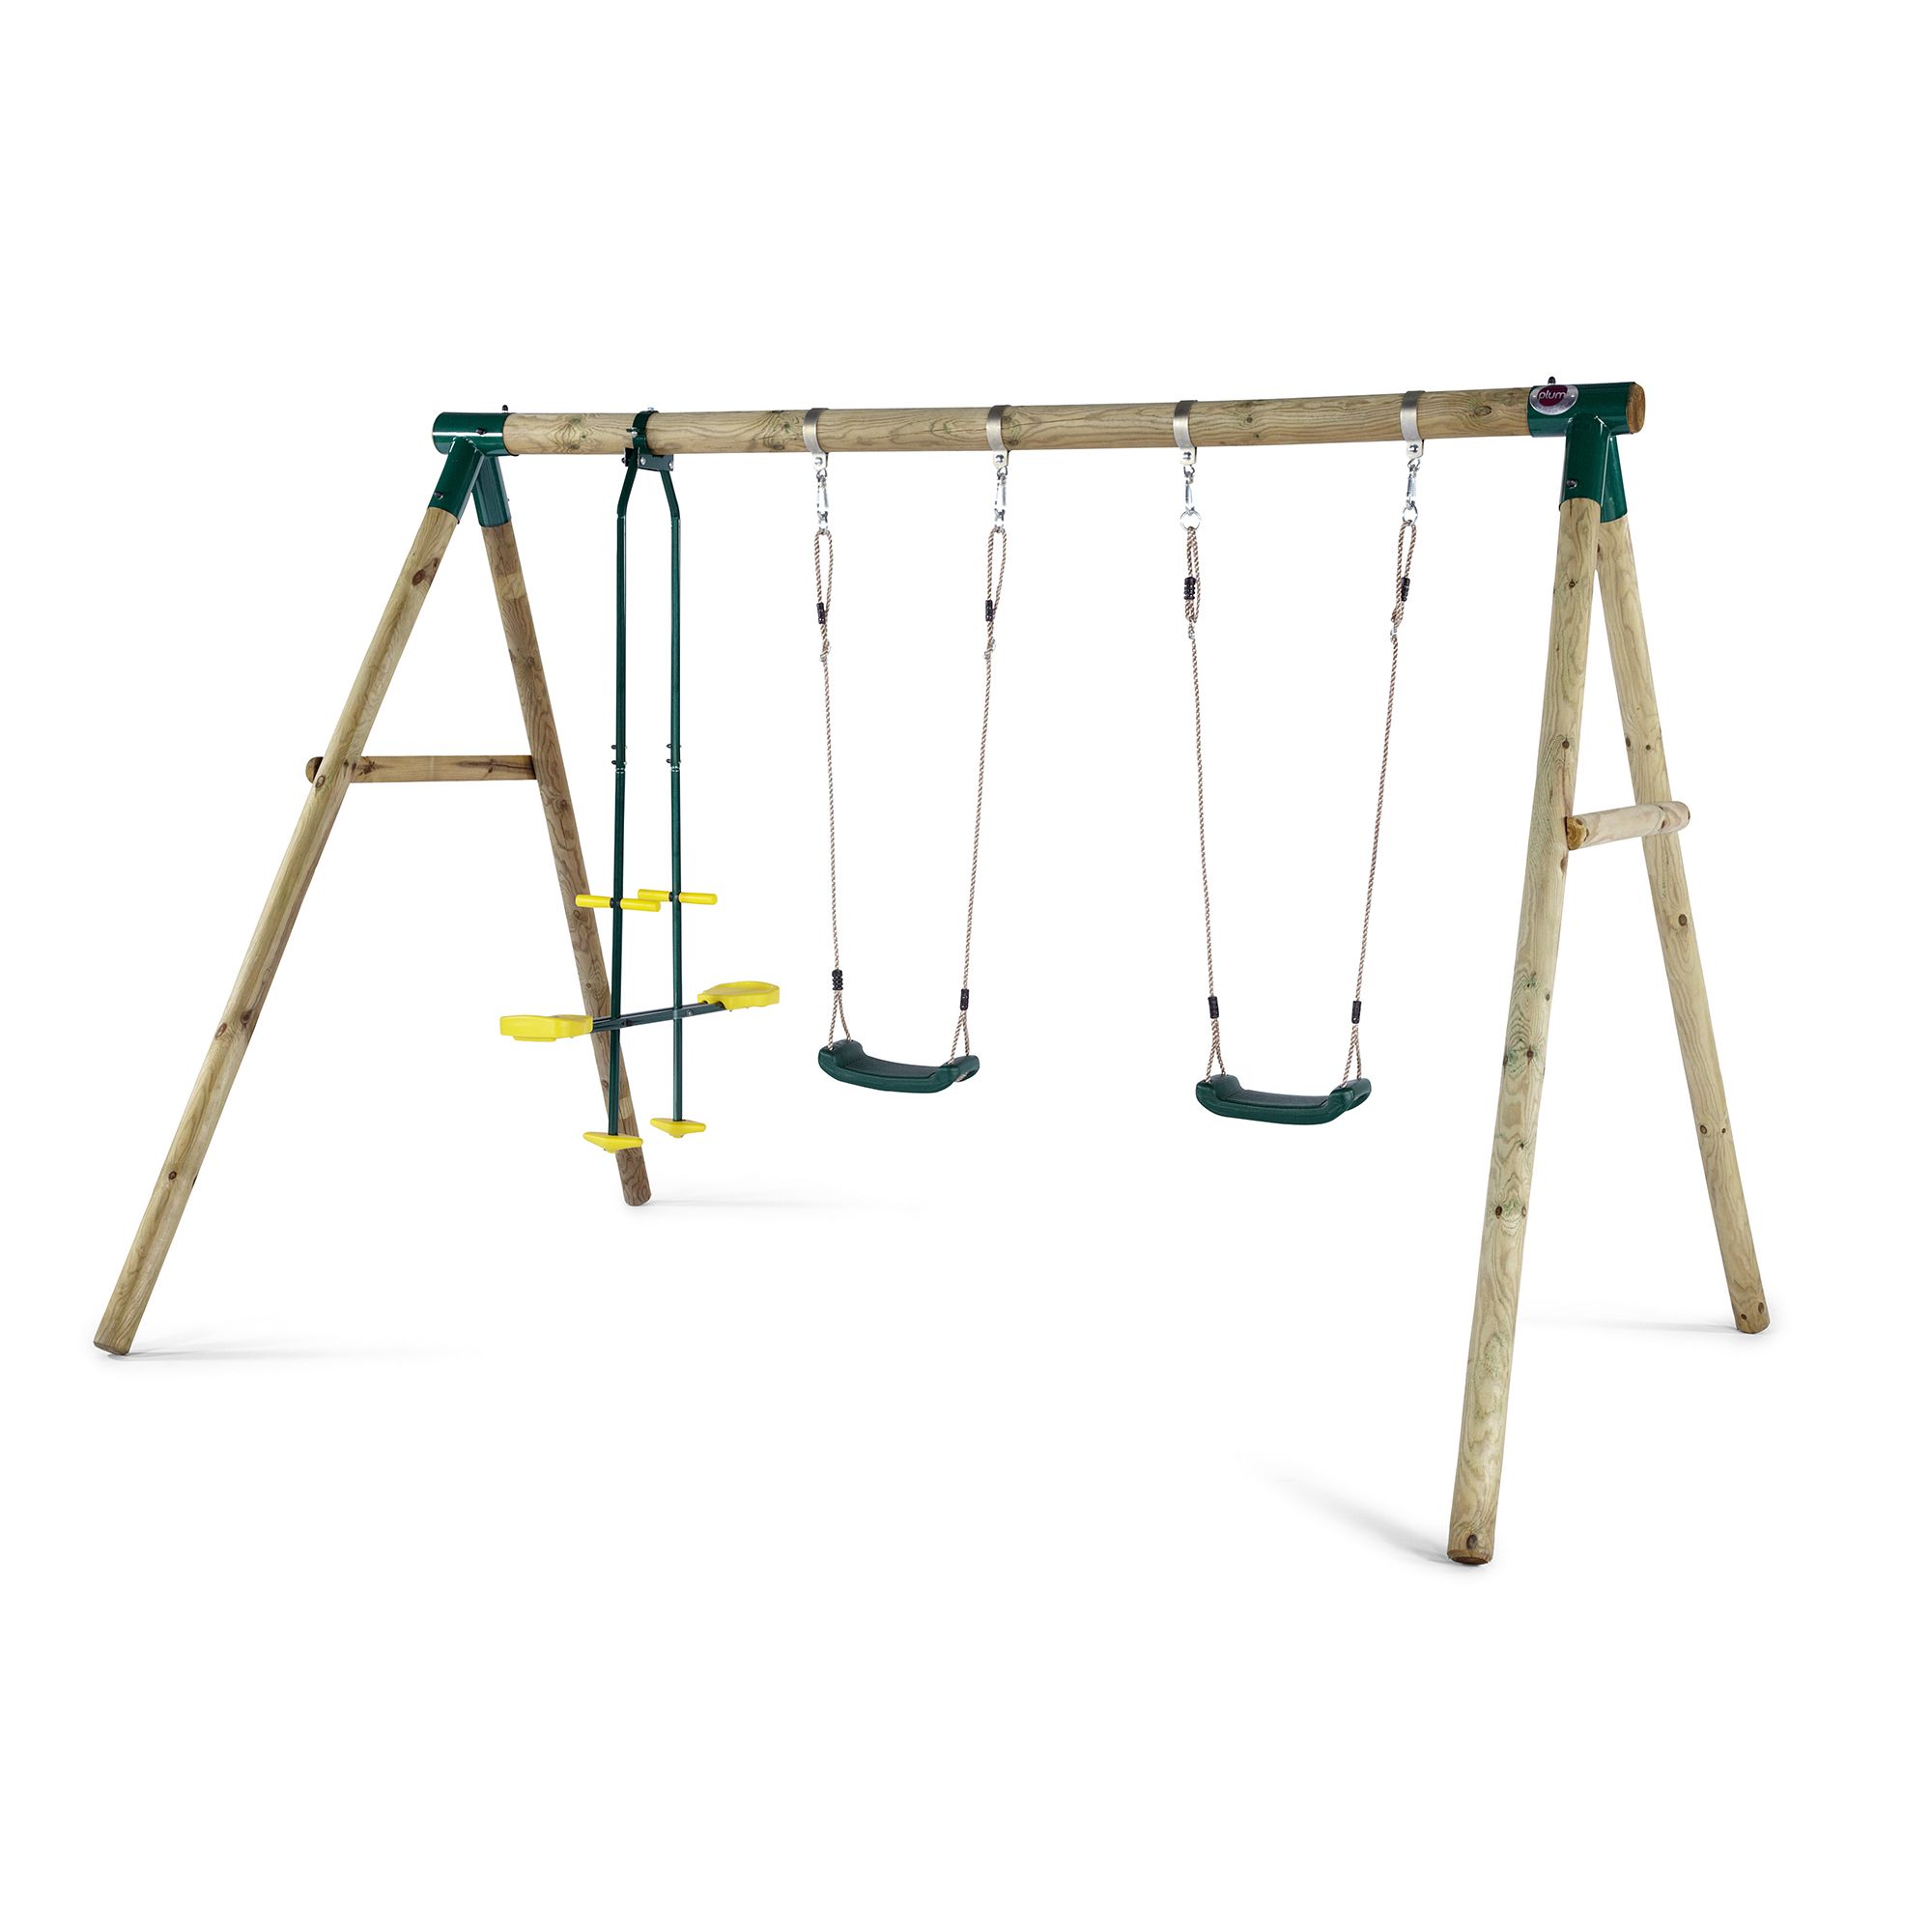 Plum Play Colobus Wooden Swingset with 2 Swings and Glider